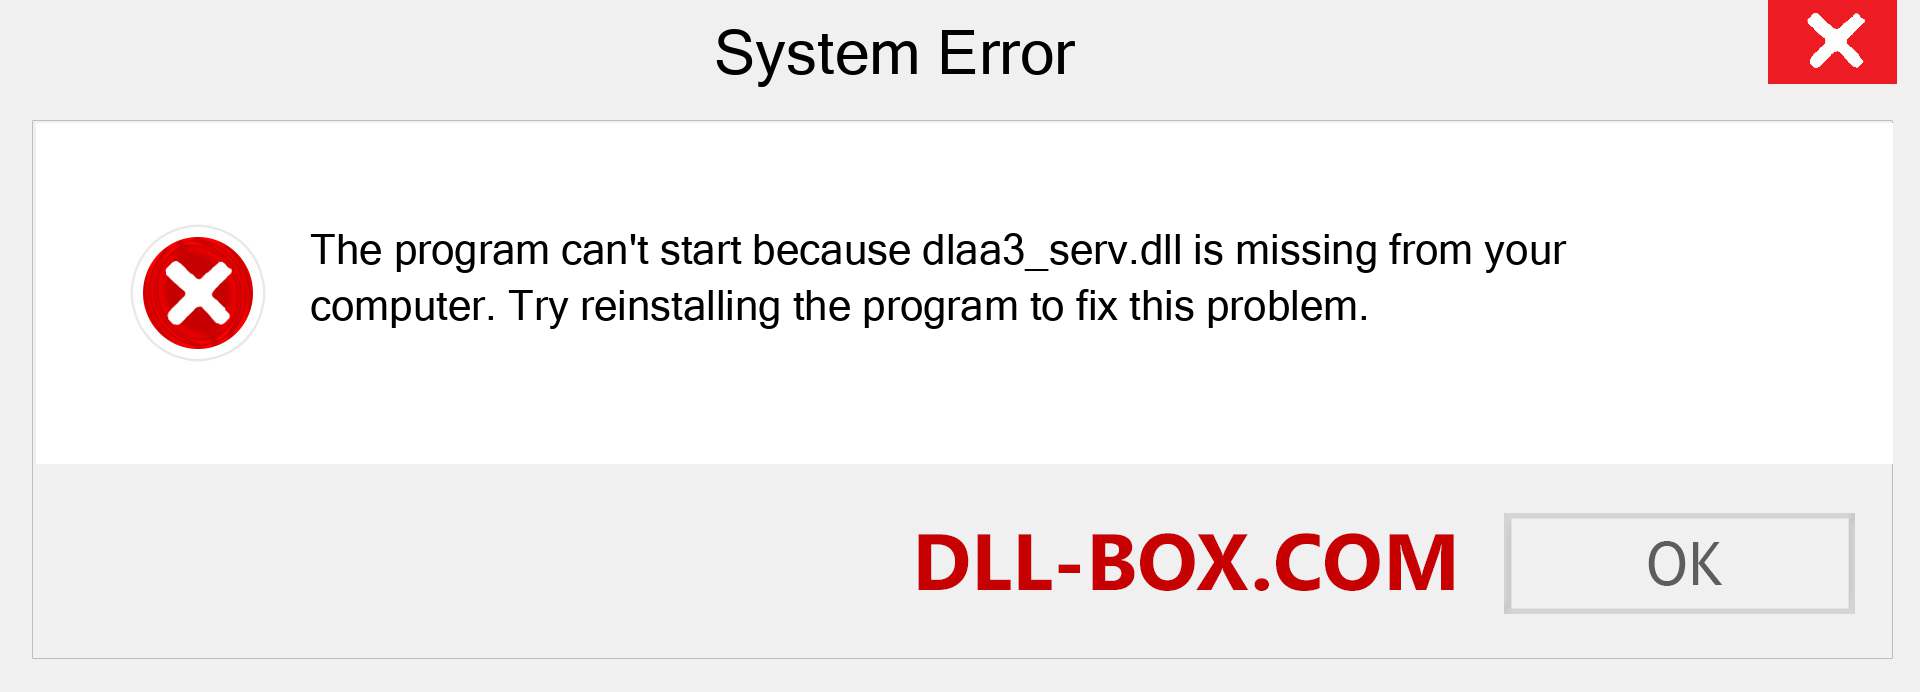  dlaa3_serv.dll file is missing?. Download for Windows 7, 8, 10 - Fix  dlaa3_serv dll Missing Error on Windows, photos, images